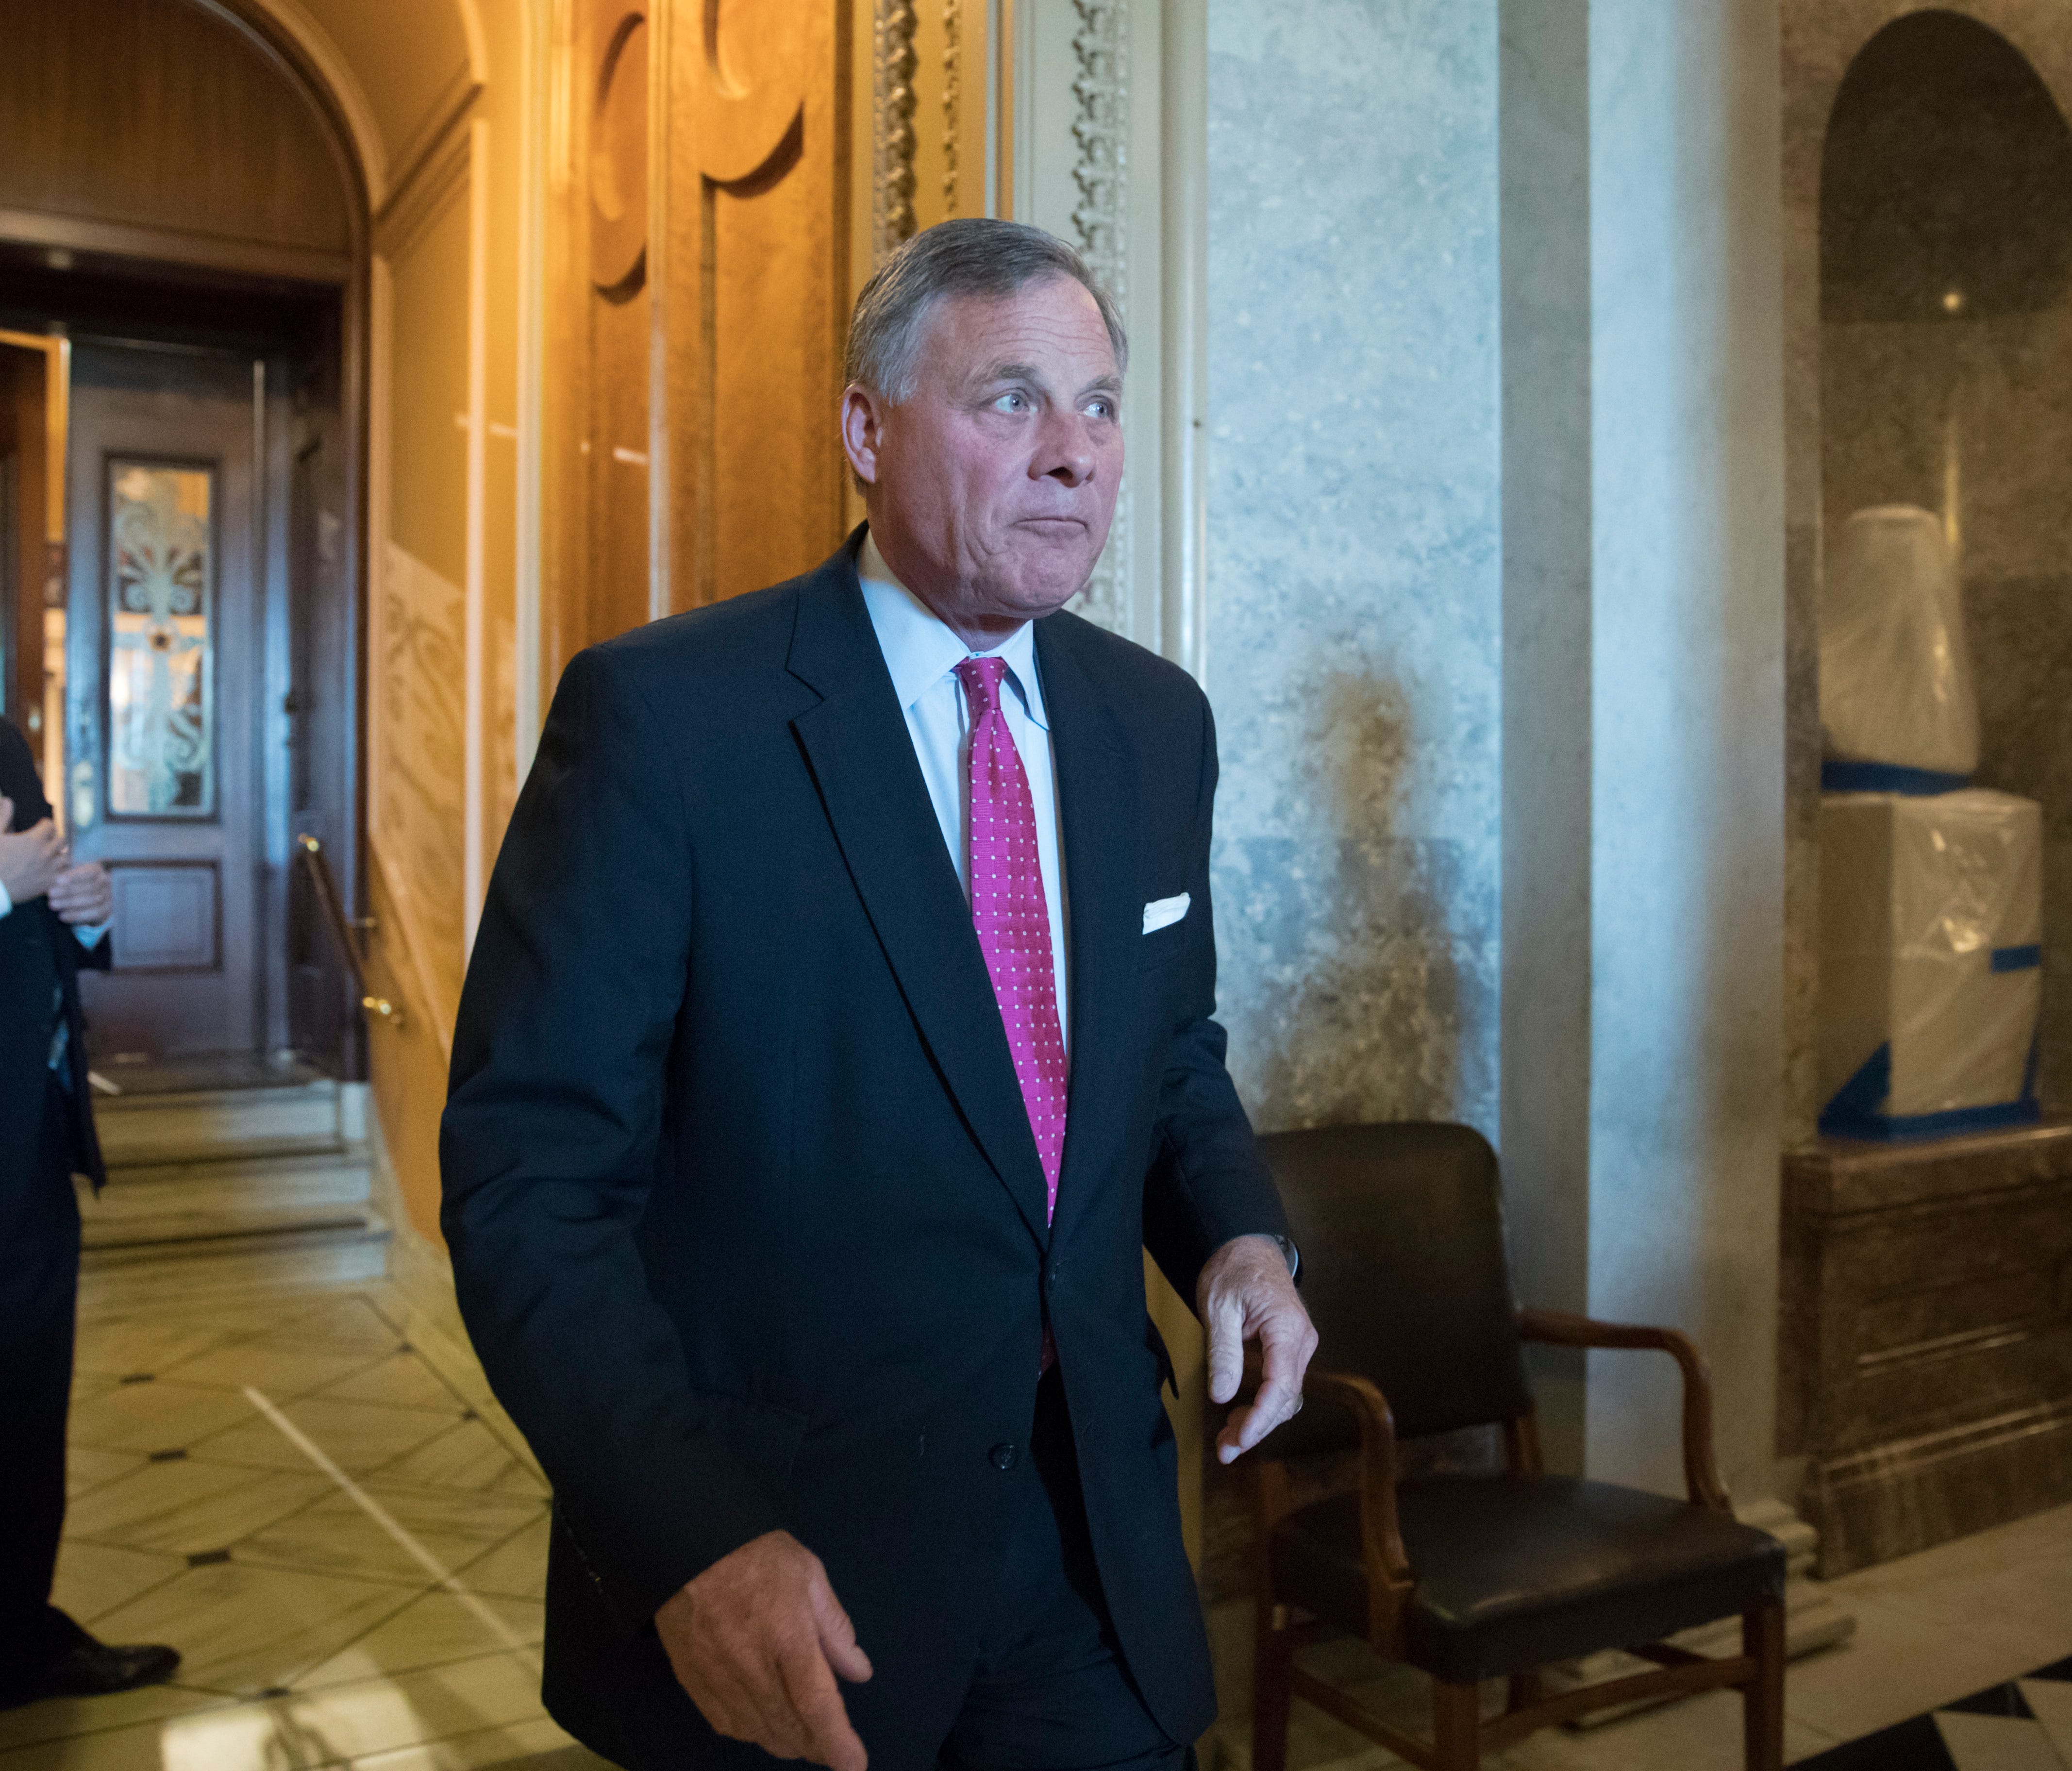 Senate Intelligence Chairman Richard Burr leaves the chamber after a vote on Capitol Hill on May 10, 2017.